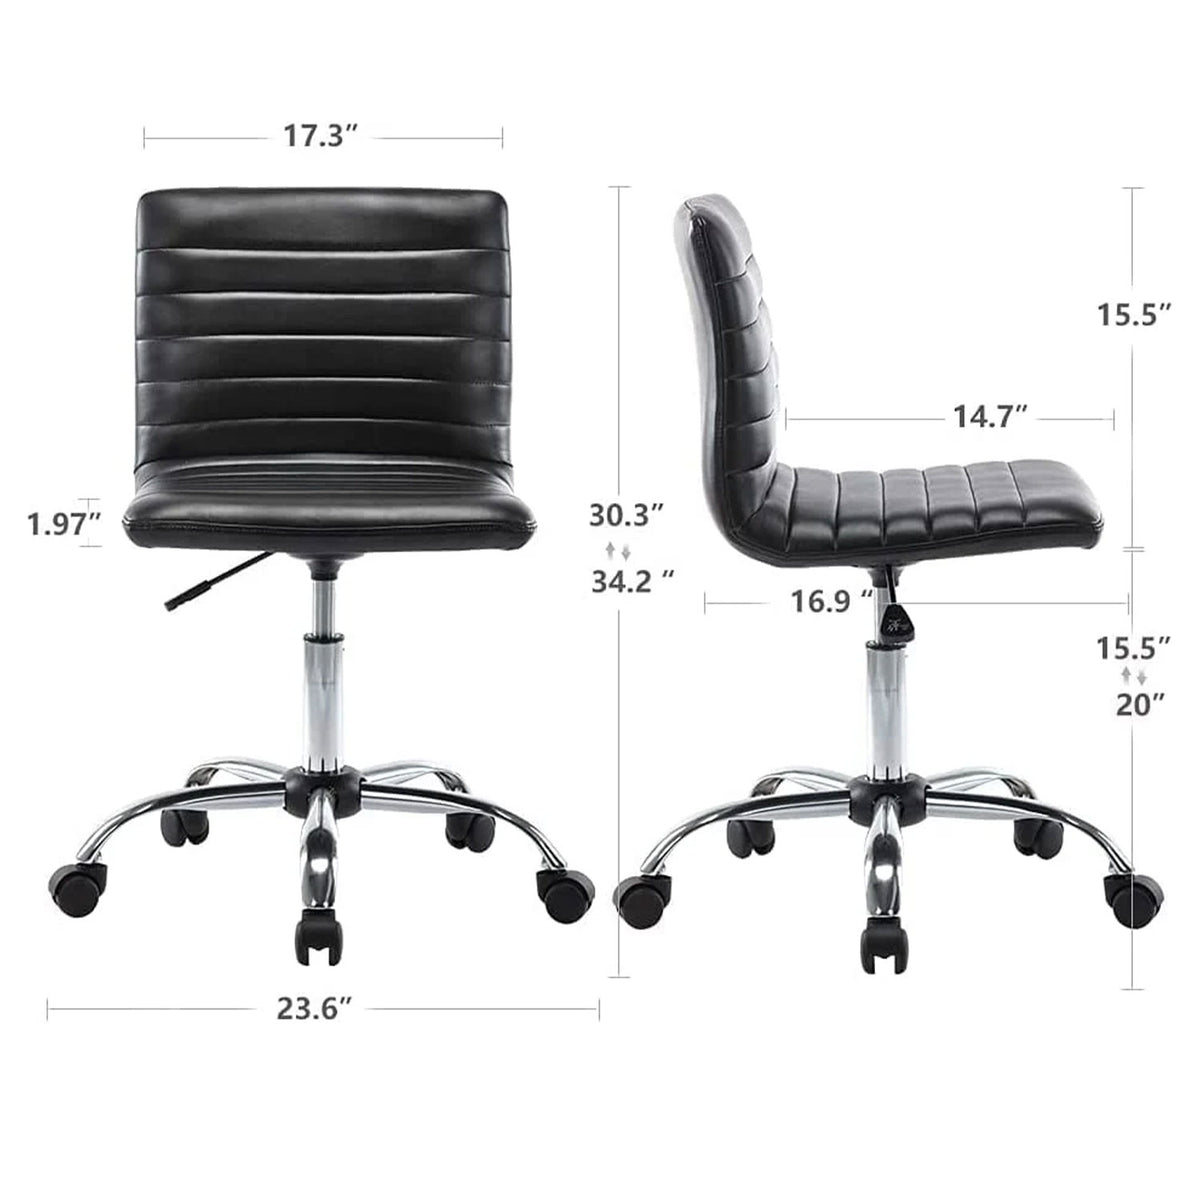 SmileSellers Armless Office Chair, Armless Desk Chair Ribbed Home Office Desk Chairs with Wheels, Faux Leather Office Chair Adjustable Task Chair, Mid Back Swivel Computer Chair